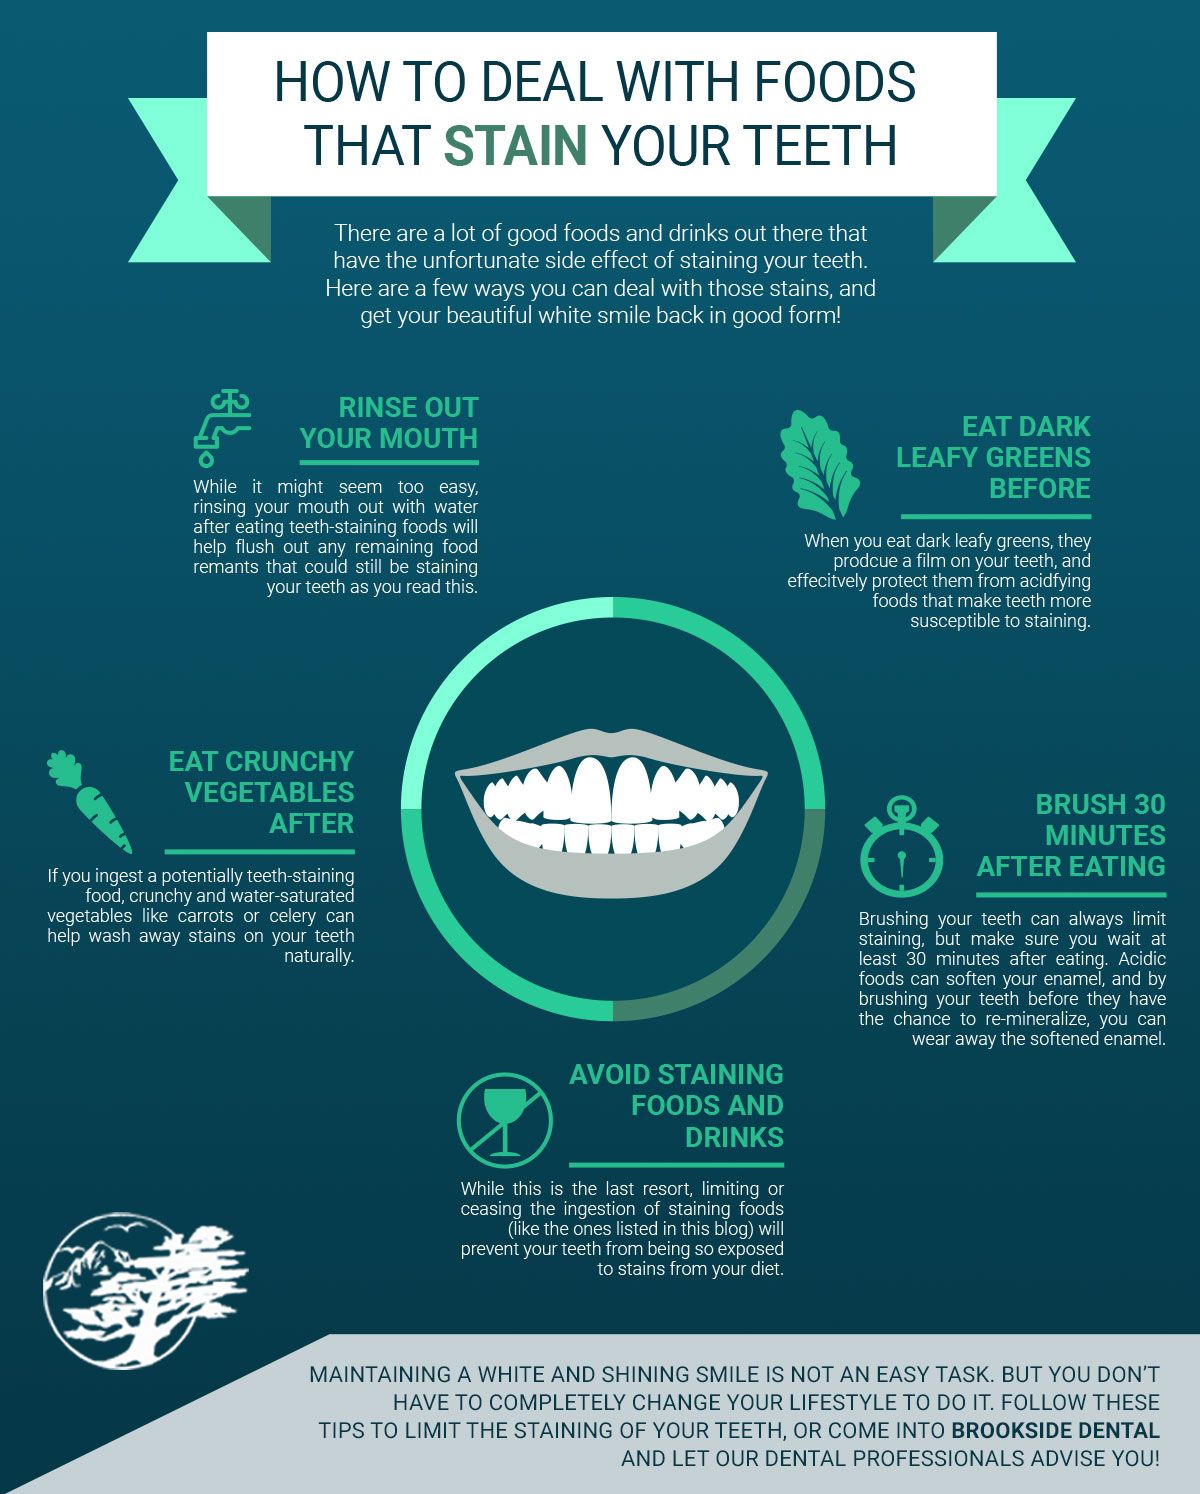 How-to-deal-with-foods-that-stain-your-teeth-infographic-5defcab5d5f3a.jpg